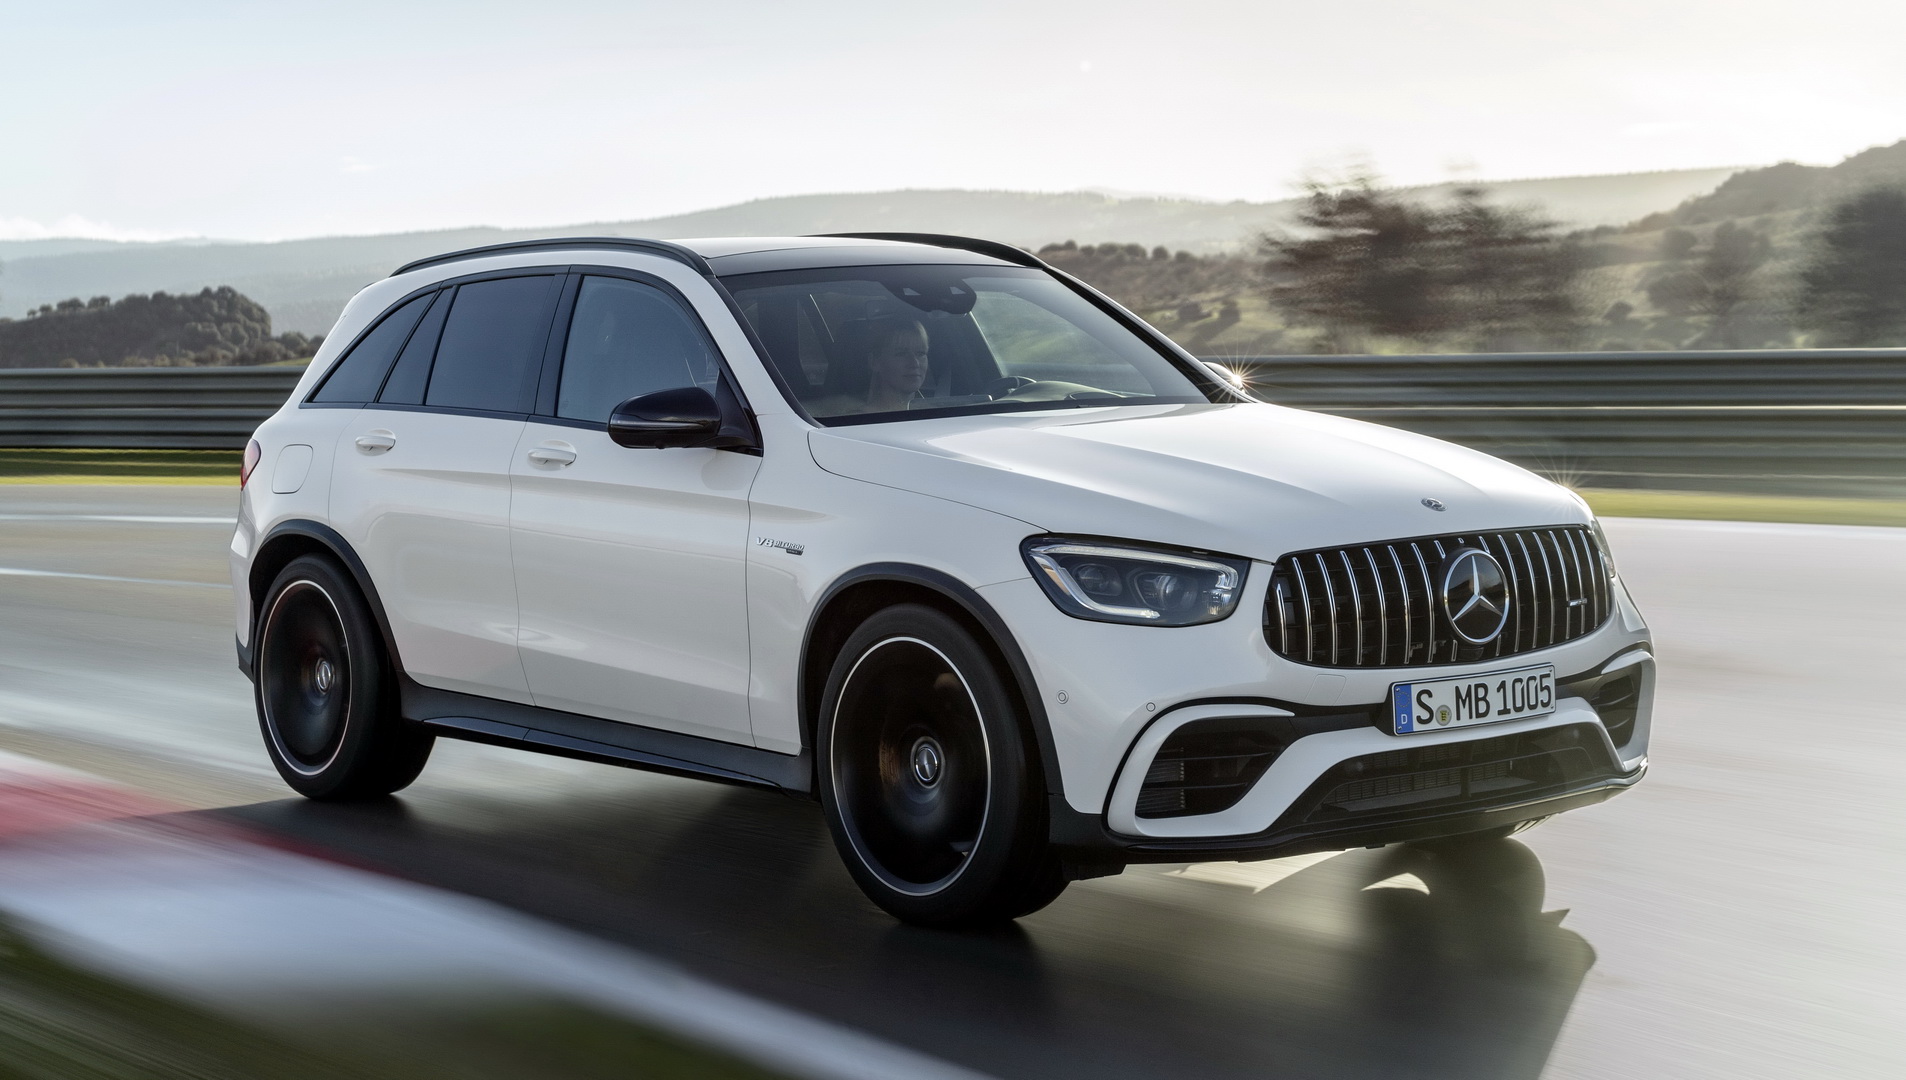 2022-mercedes-amg-glc-63-s-joins-us-range-with-503-hp-will-hit-60-mph-in-36s-160235-1.jpg